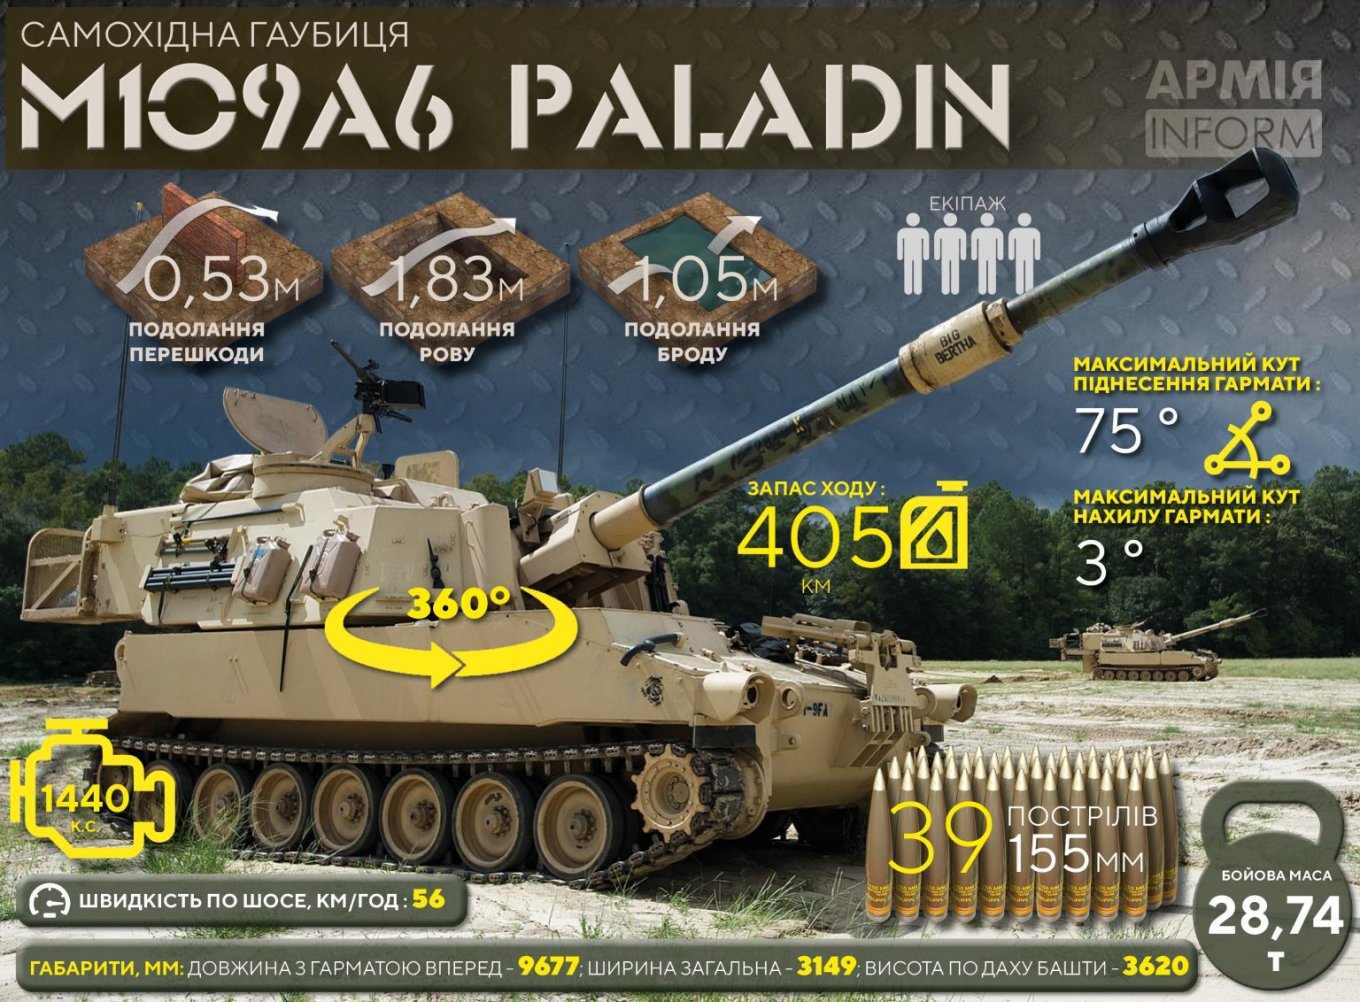 Infographics ArmyInform, revealing the characteristics of the M109A6 ACS